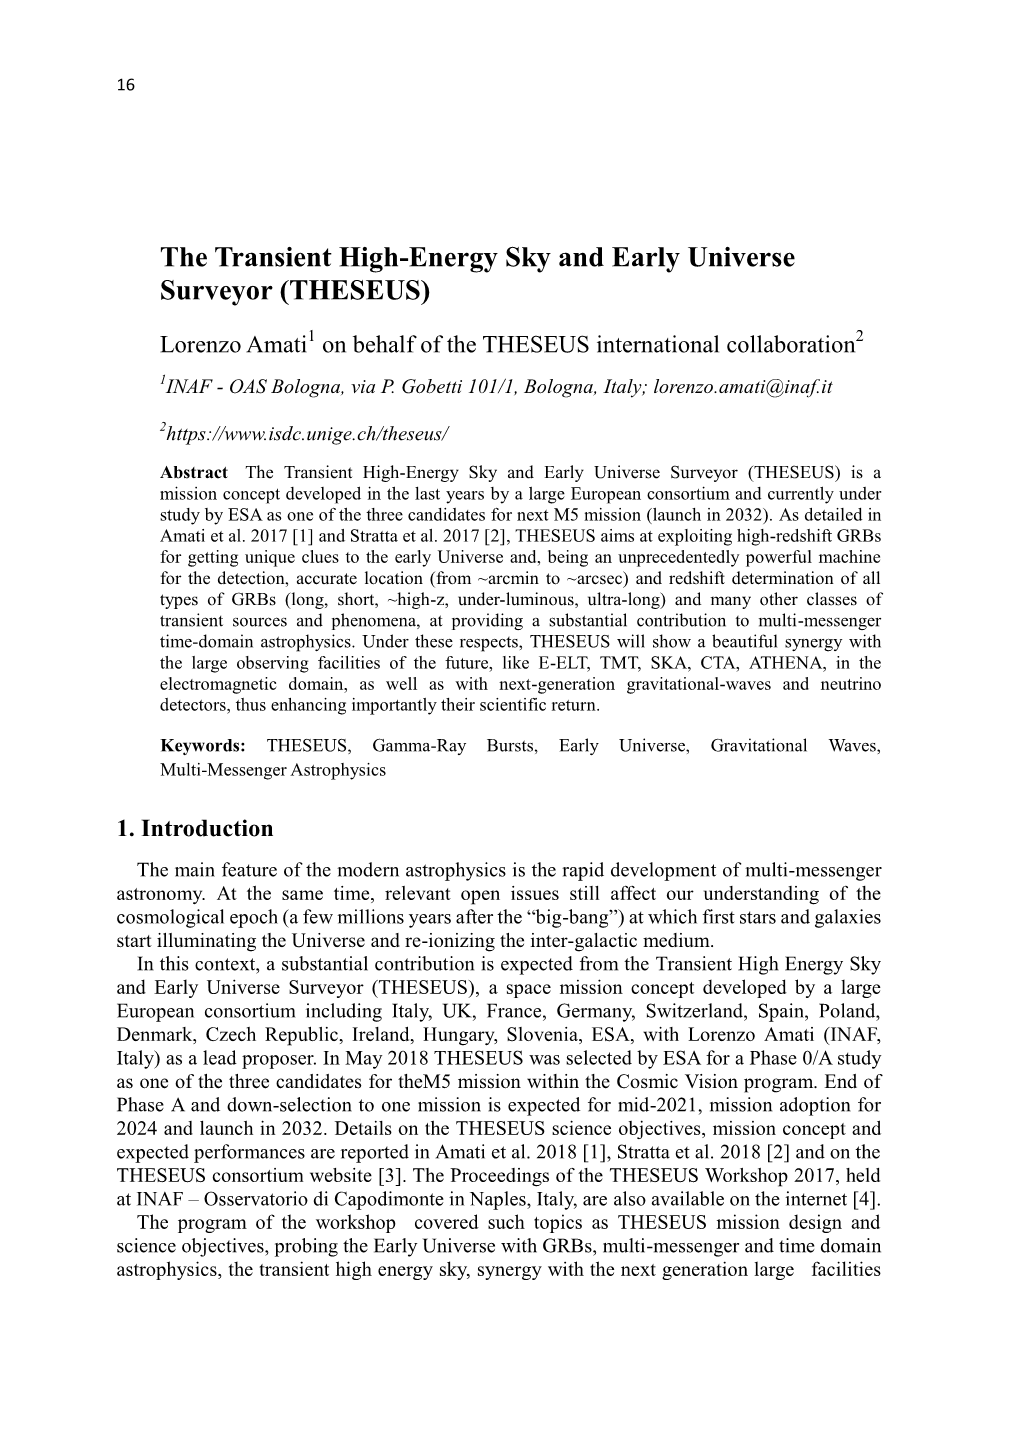 The Transient High-Energy Sky and Early Universe Surveyor (THESEUS)